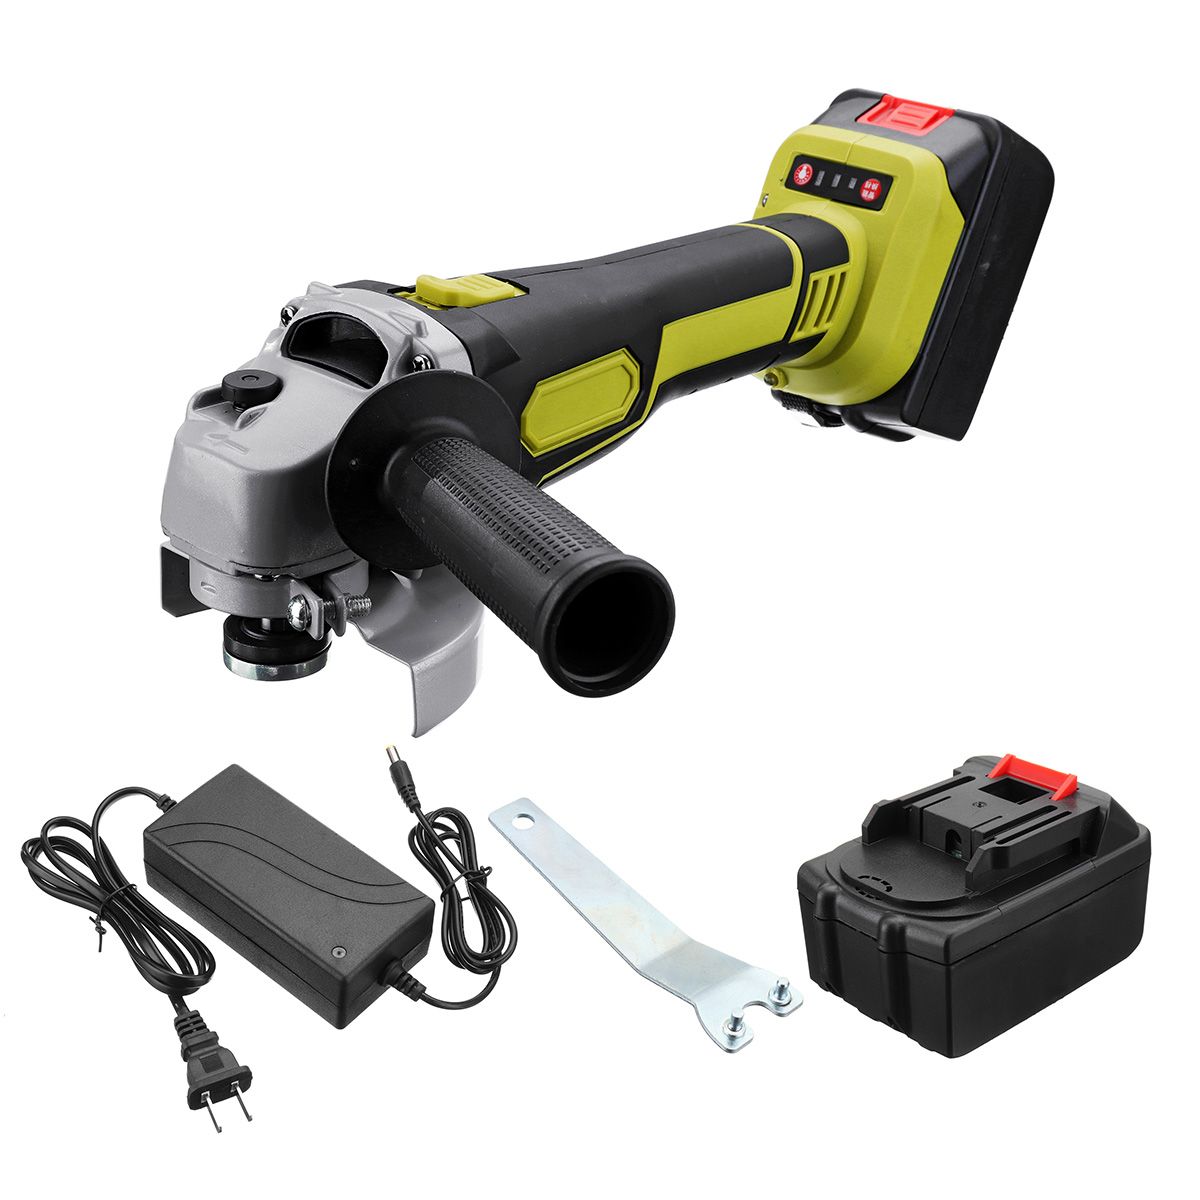 188VF218VF-Brushless-Cordless-Angle-Grinder-Electric-Power-Angle-Grinding-Cutting-W-1-or-2-Li-ion-Ba-1431177